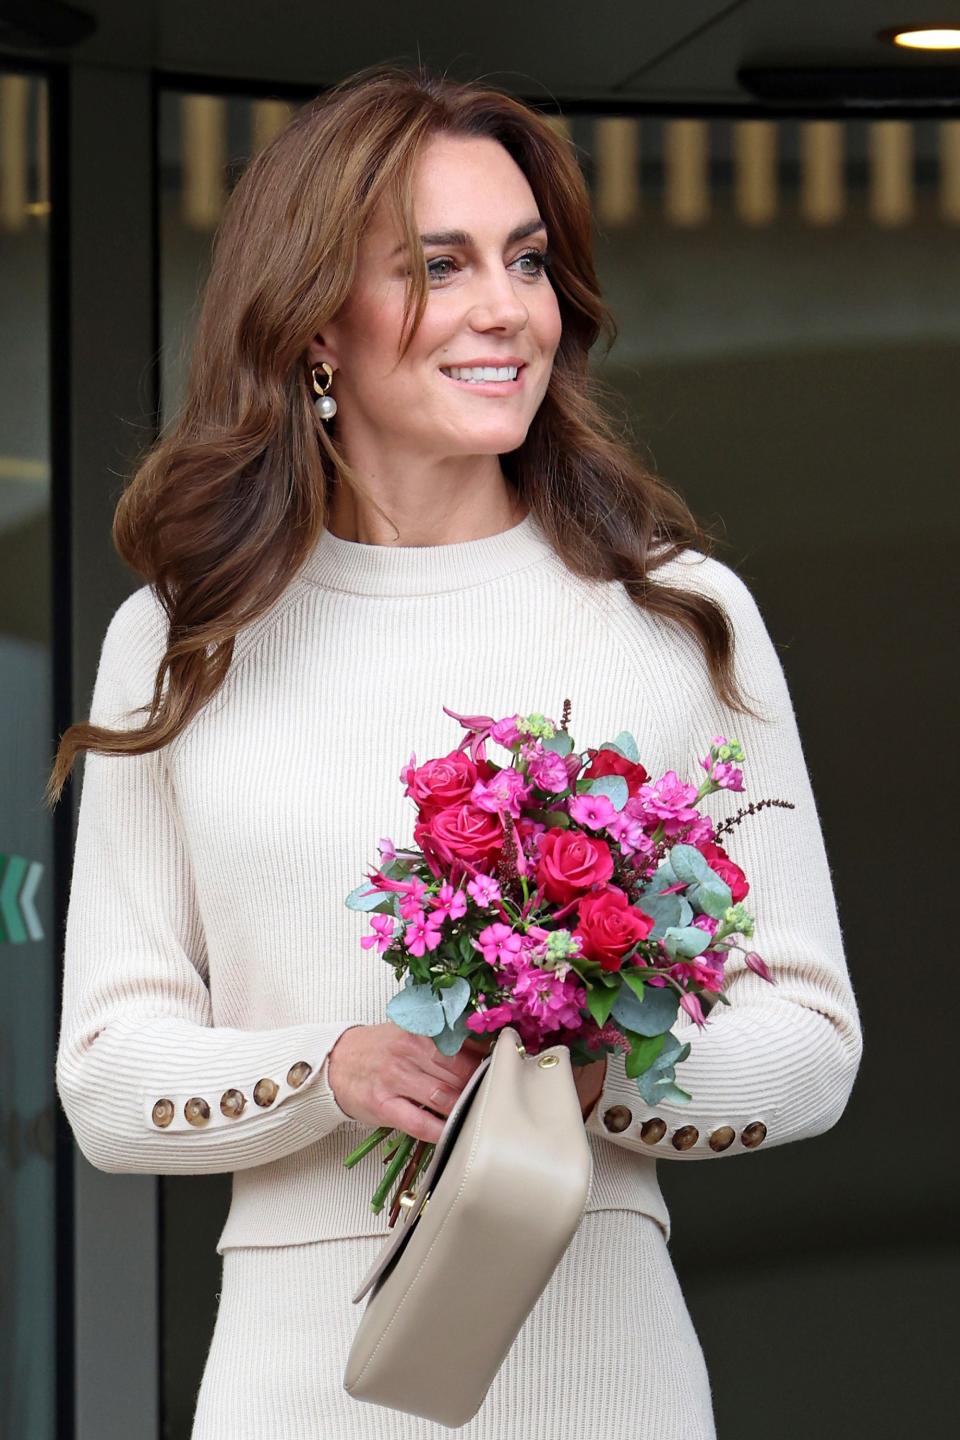 Princess Kate has been hospitalized and will remain out of the public until after Easter.